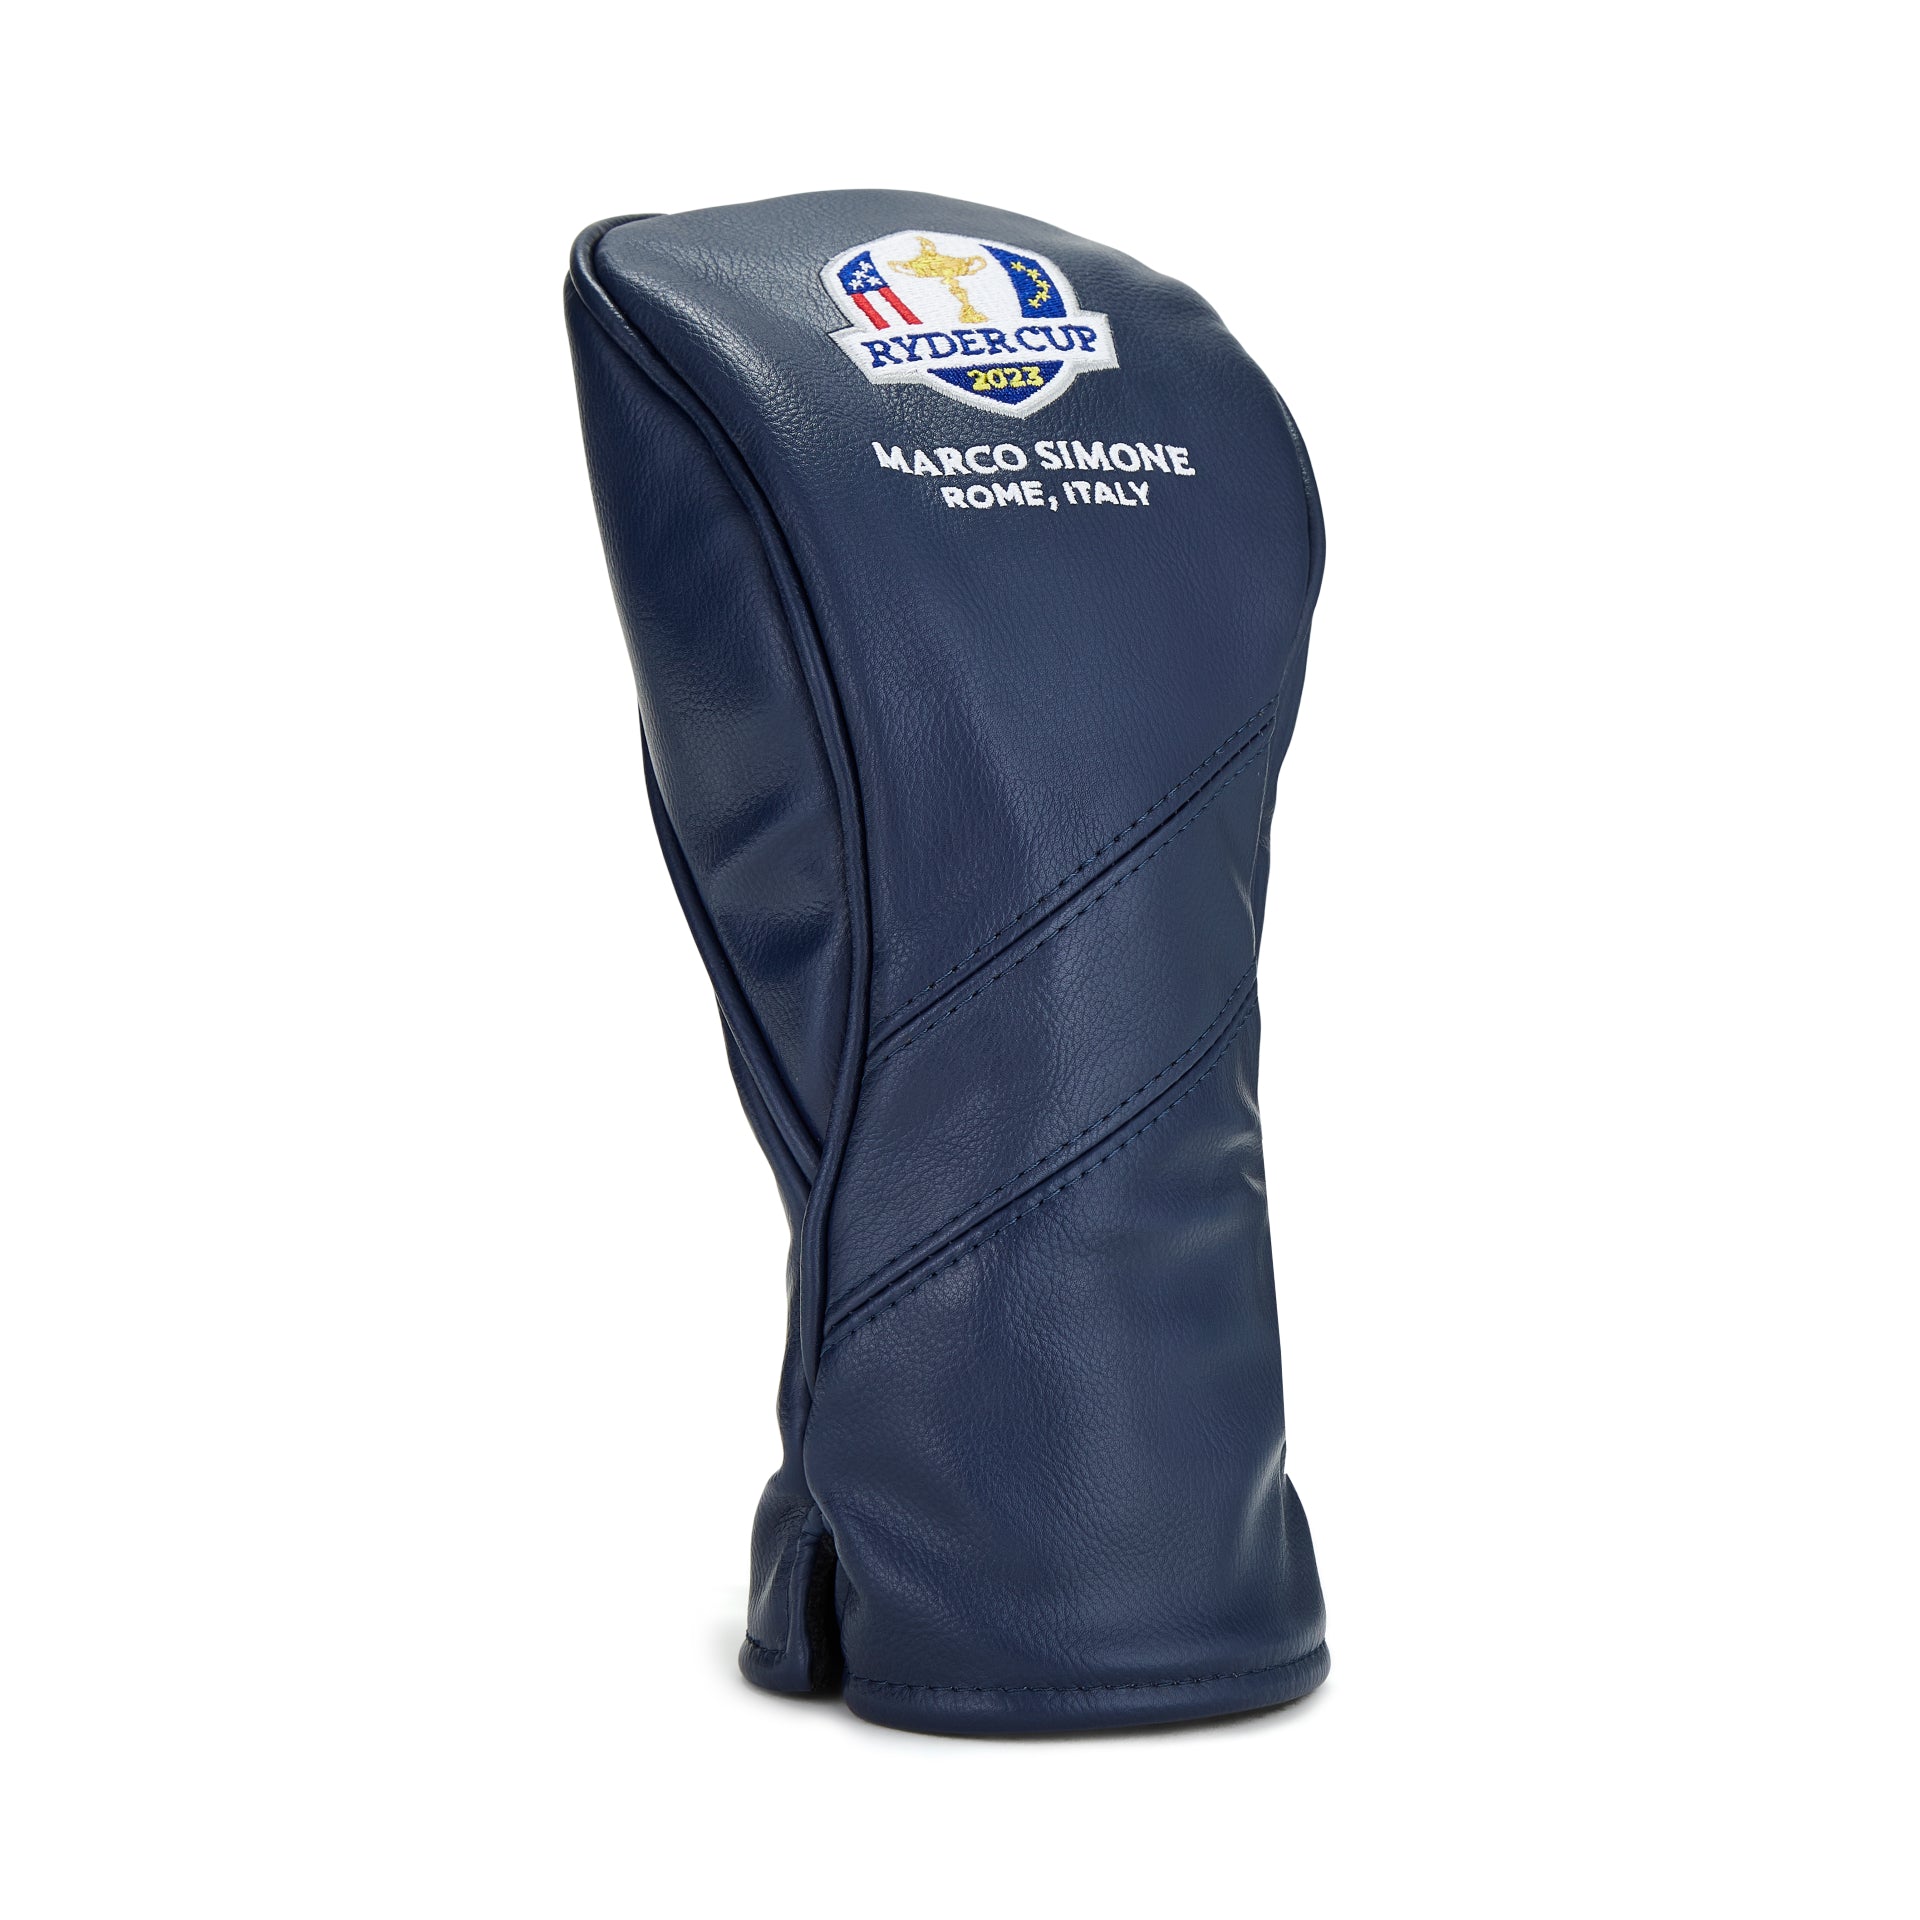 SS23 FCRB FAIRWAY WOOD HEAD COVER-